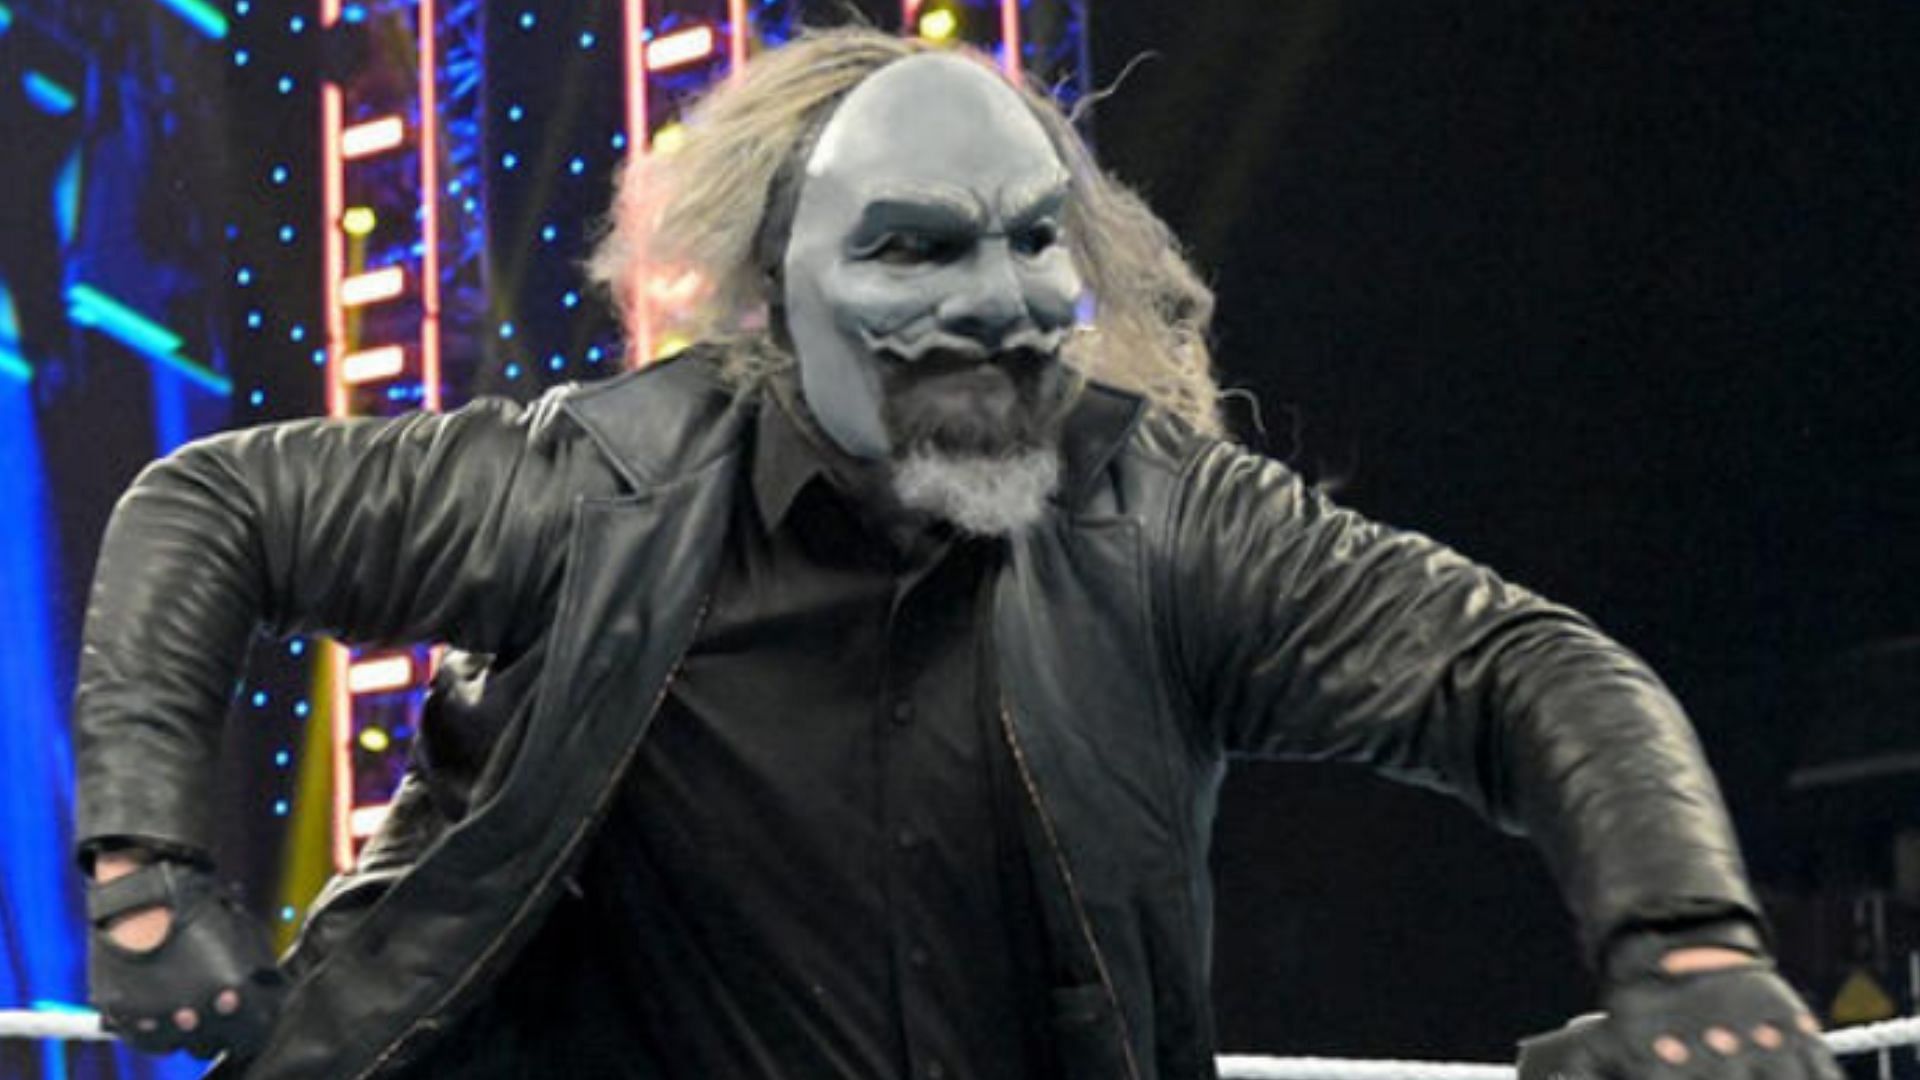 Uncle Howdy may be gearing up for a comeback in WWE [Image Credits: WWE